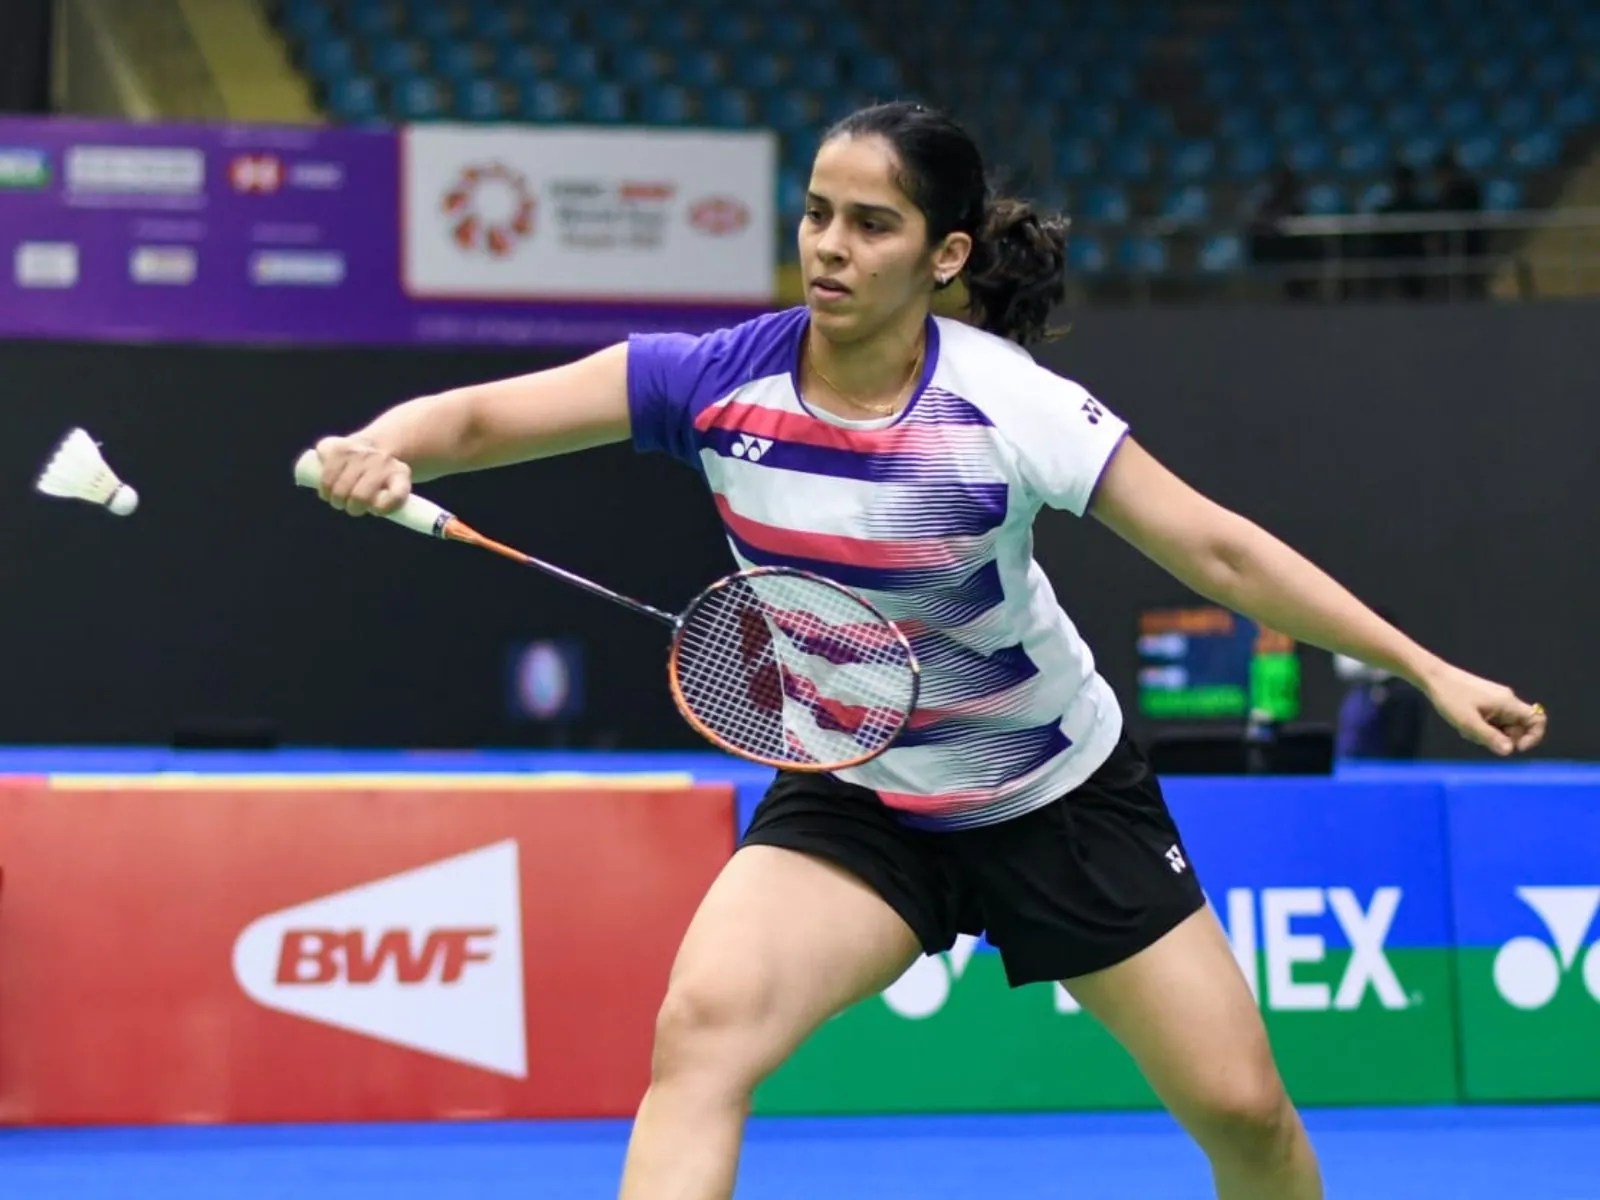 Malaysia Open Badminton LIVE: PV Sindhu headlines first round action on Day 2 at Malaysia Open, Saina Nehwal and Kashyap to begin campaign - Follow LIVE updates